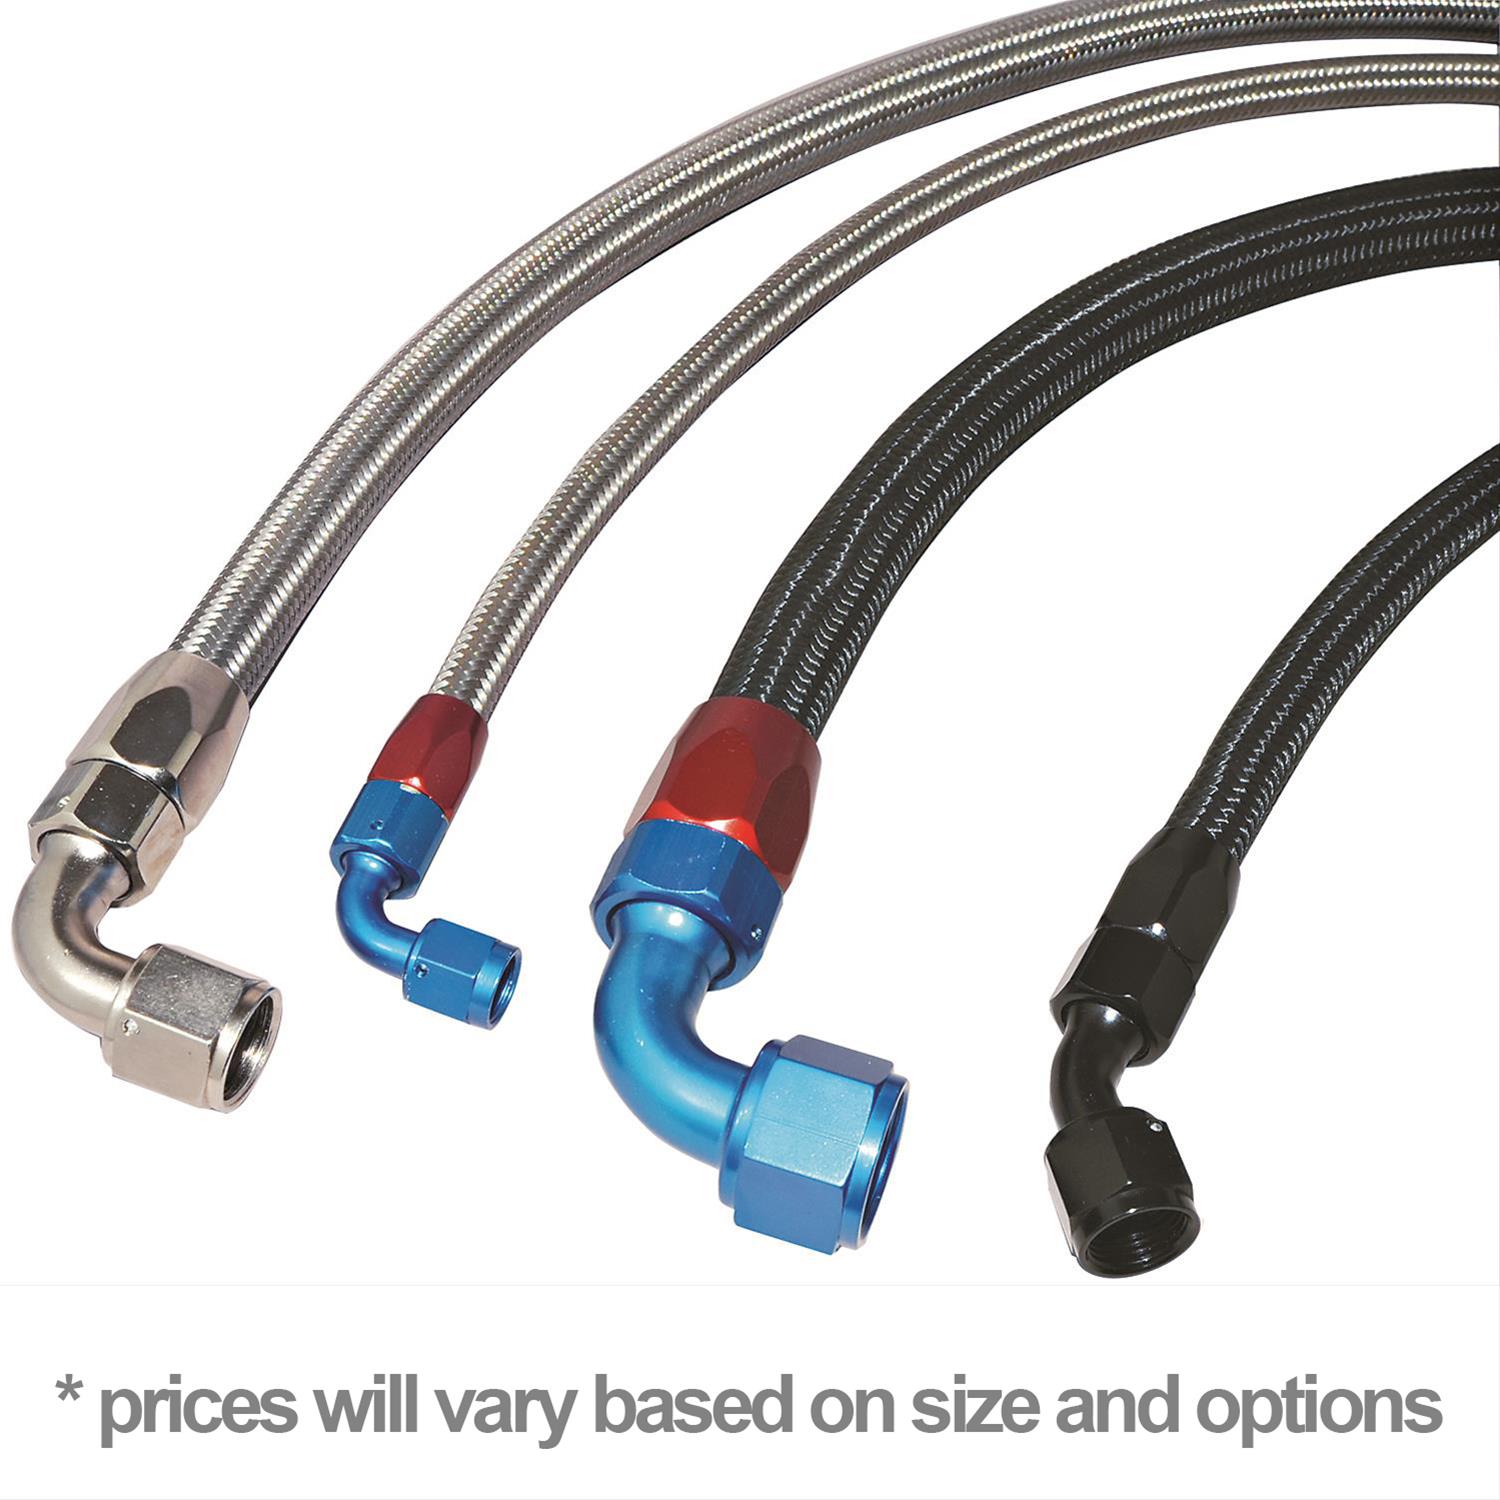 AN Hoses And Fittings Guide — Kanga Motorsports, 46% OFF